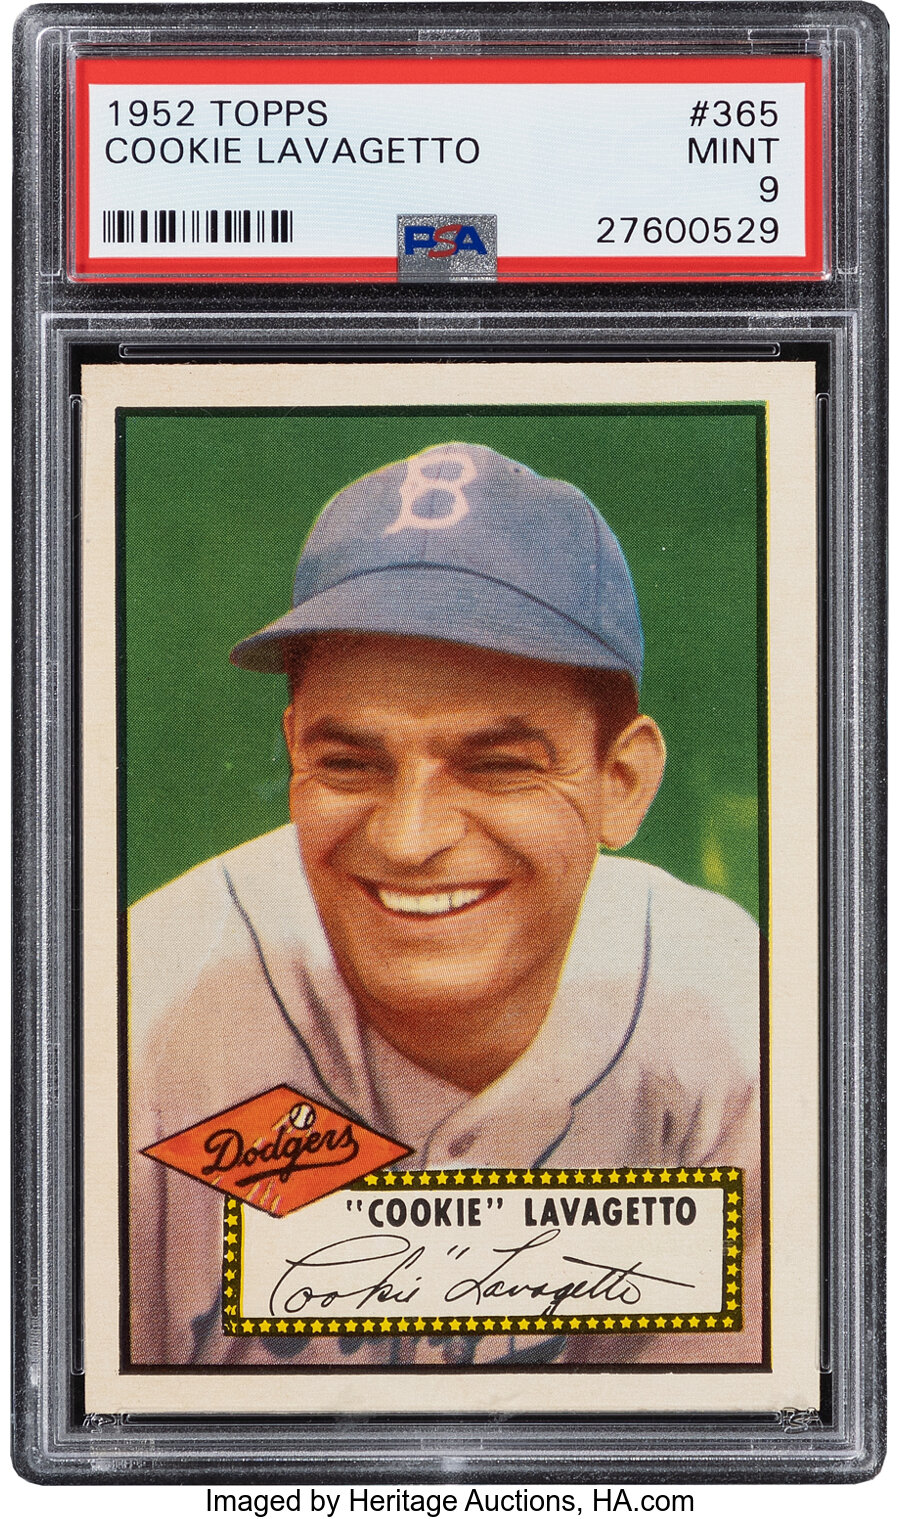 1952 Topps Cookie Lavagetto #365 PSA Mint 9 - None Higher